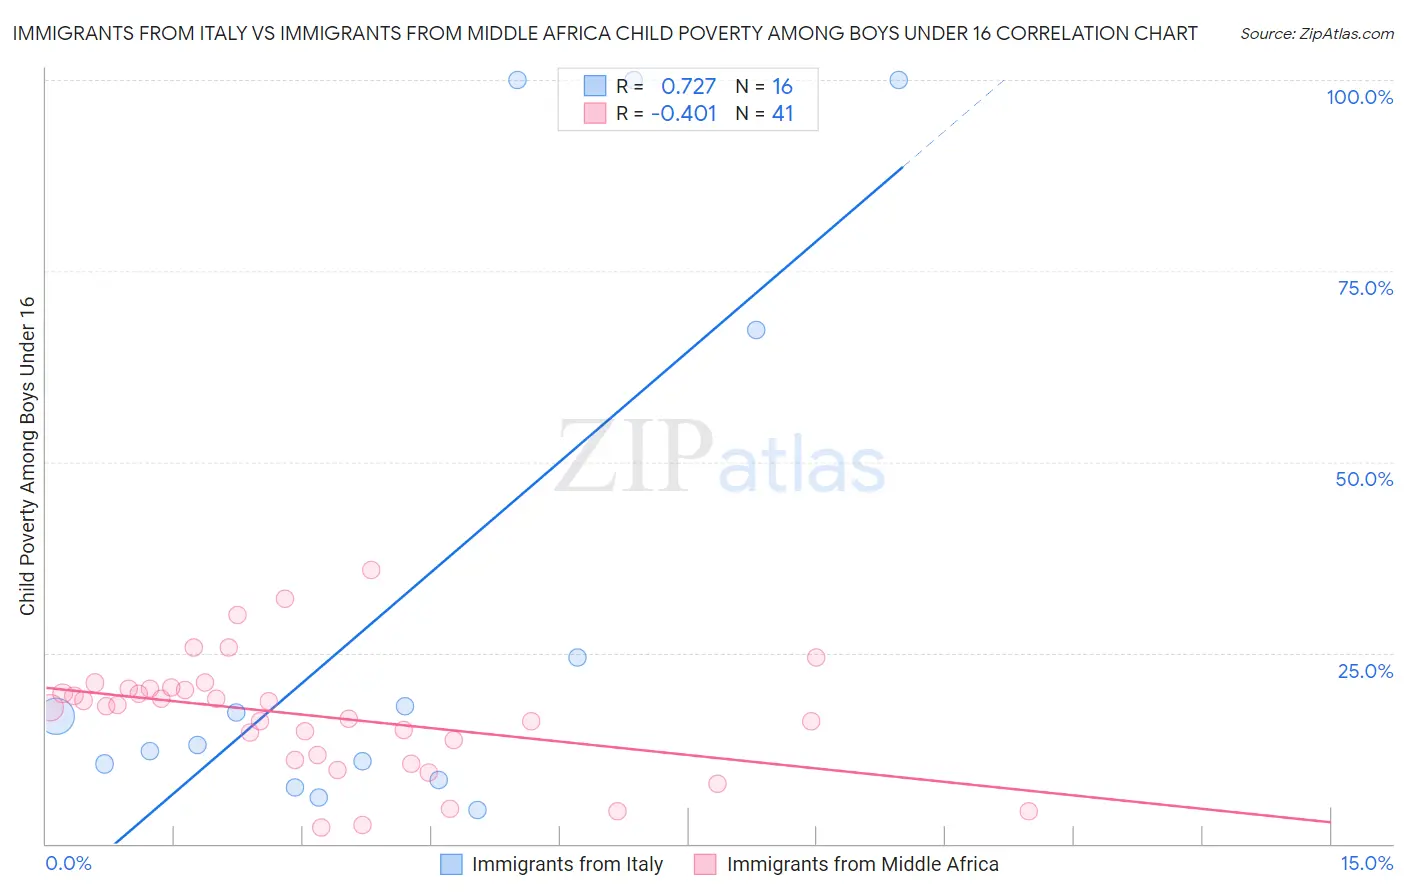 Immigrants from Italy vs Immigrants from Middle Africa Child Poverty Among Boys Under 16